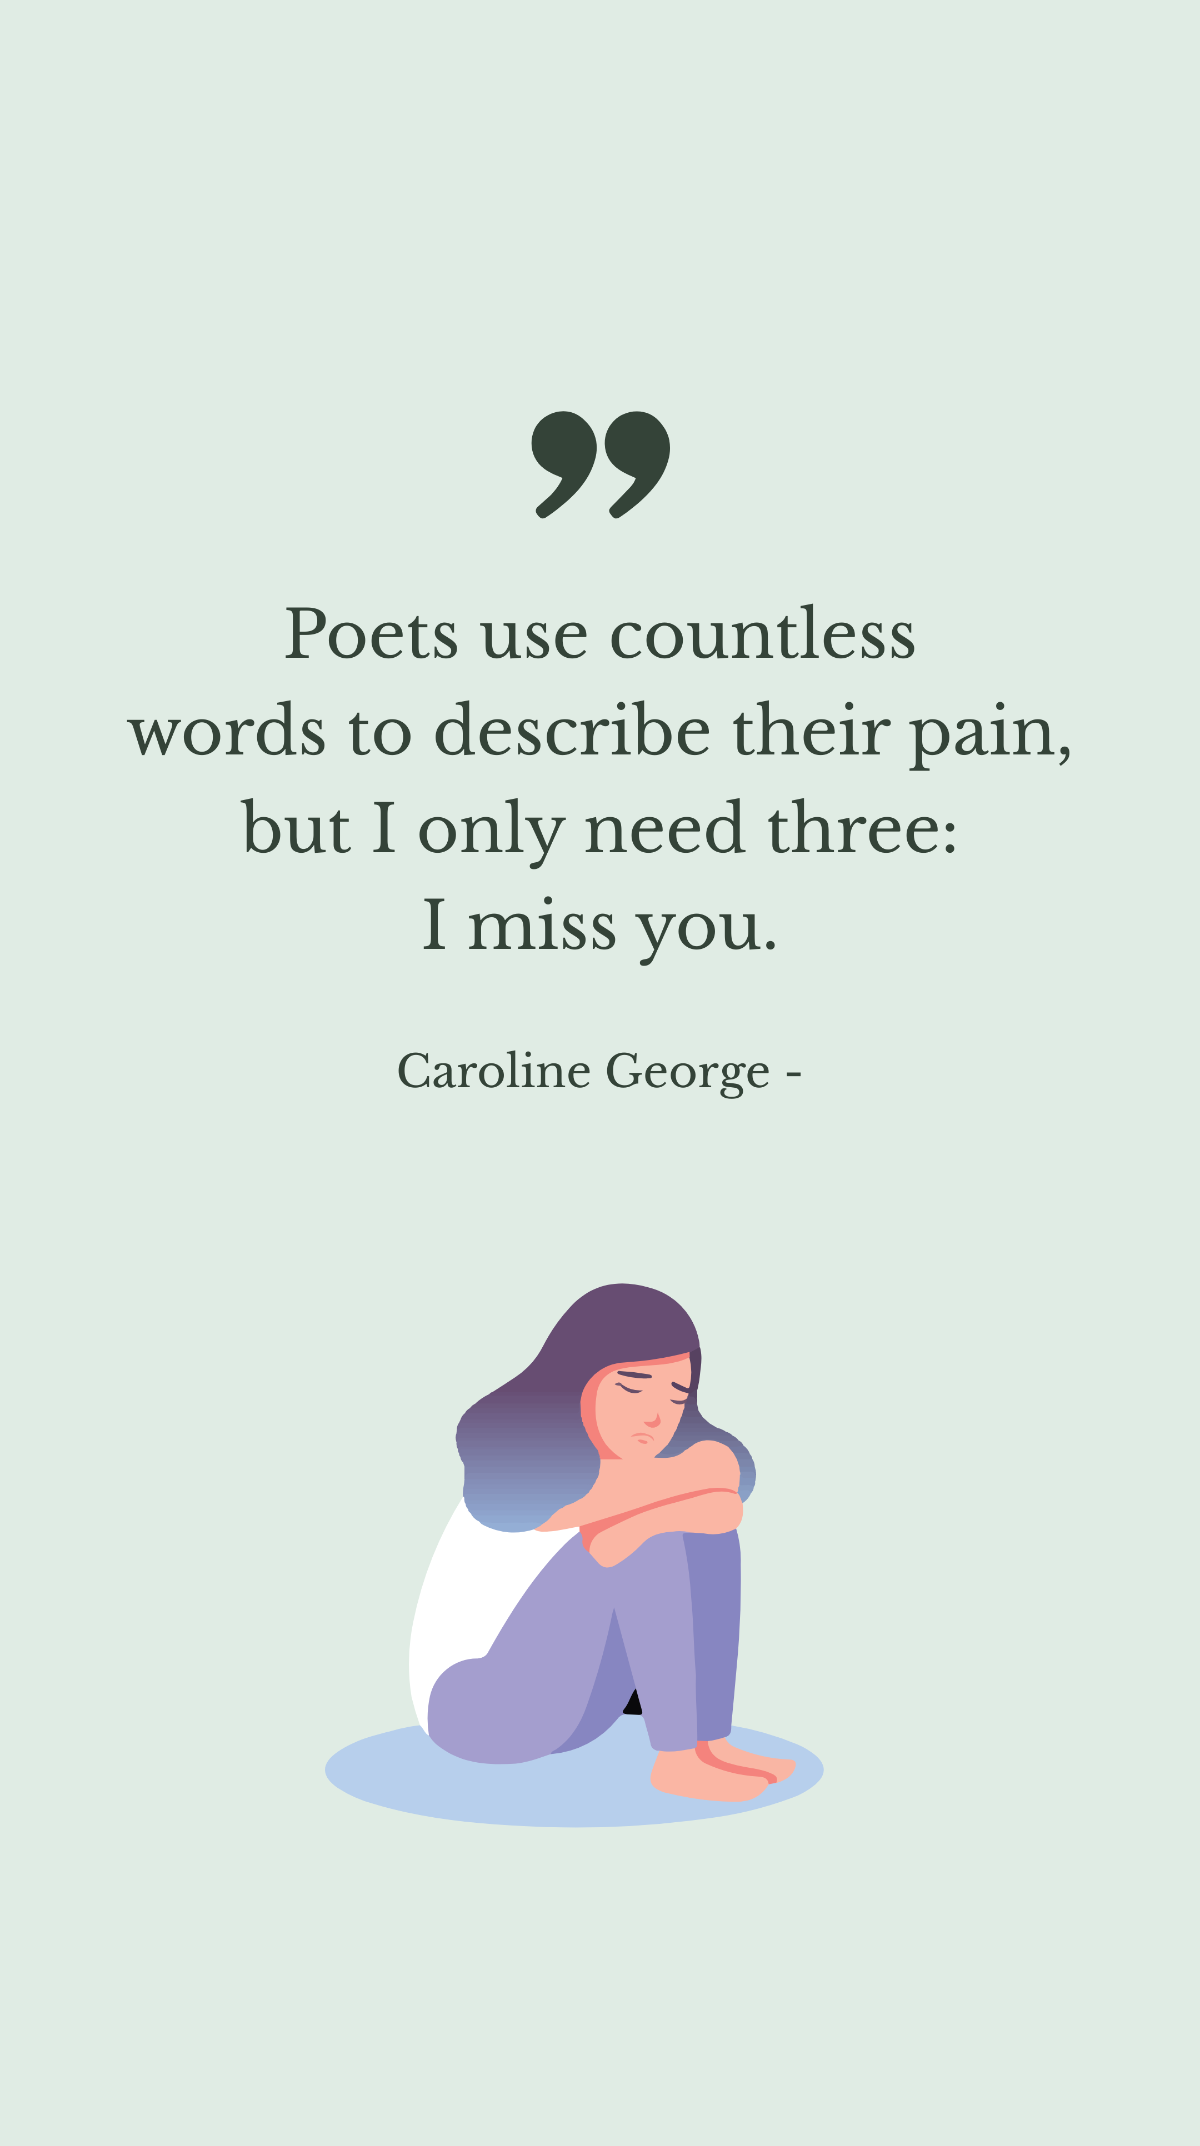 Caroline George - Poets use countless words to describe their pain, but I only need three: I miss you. Template